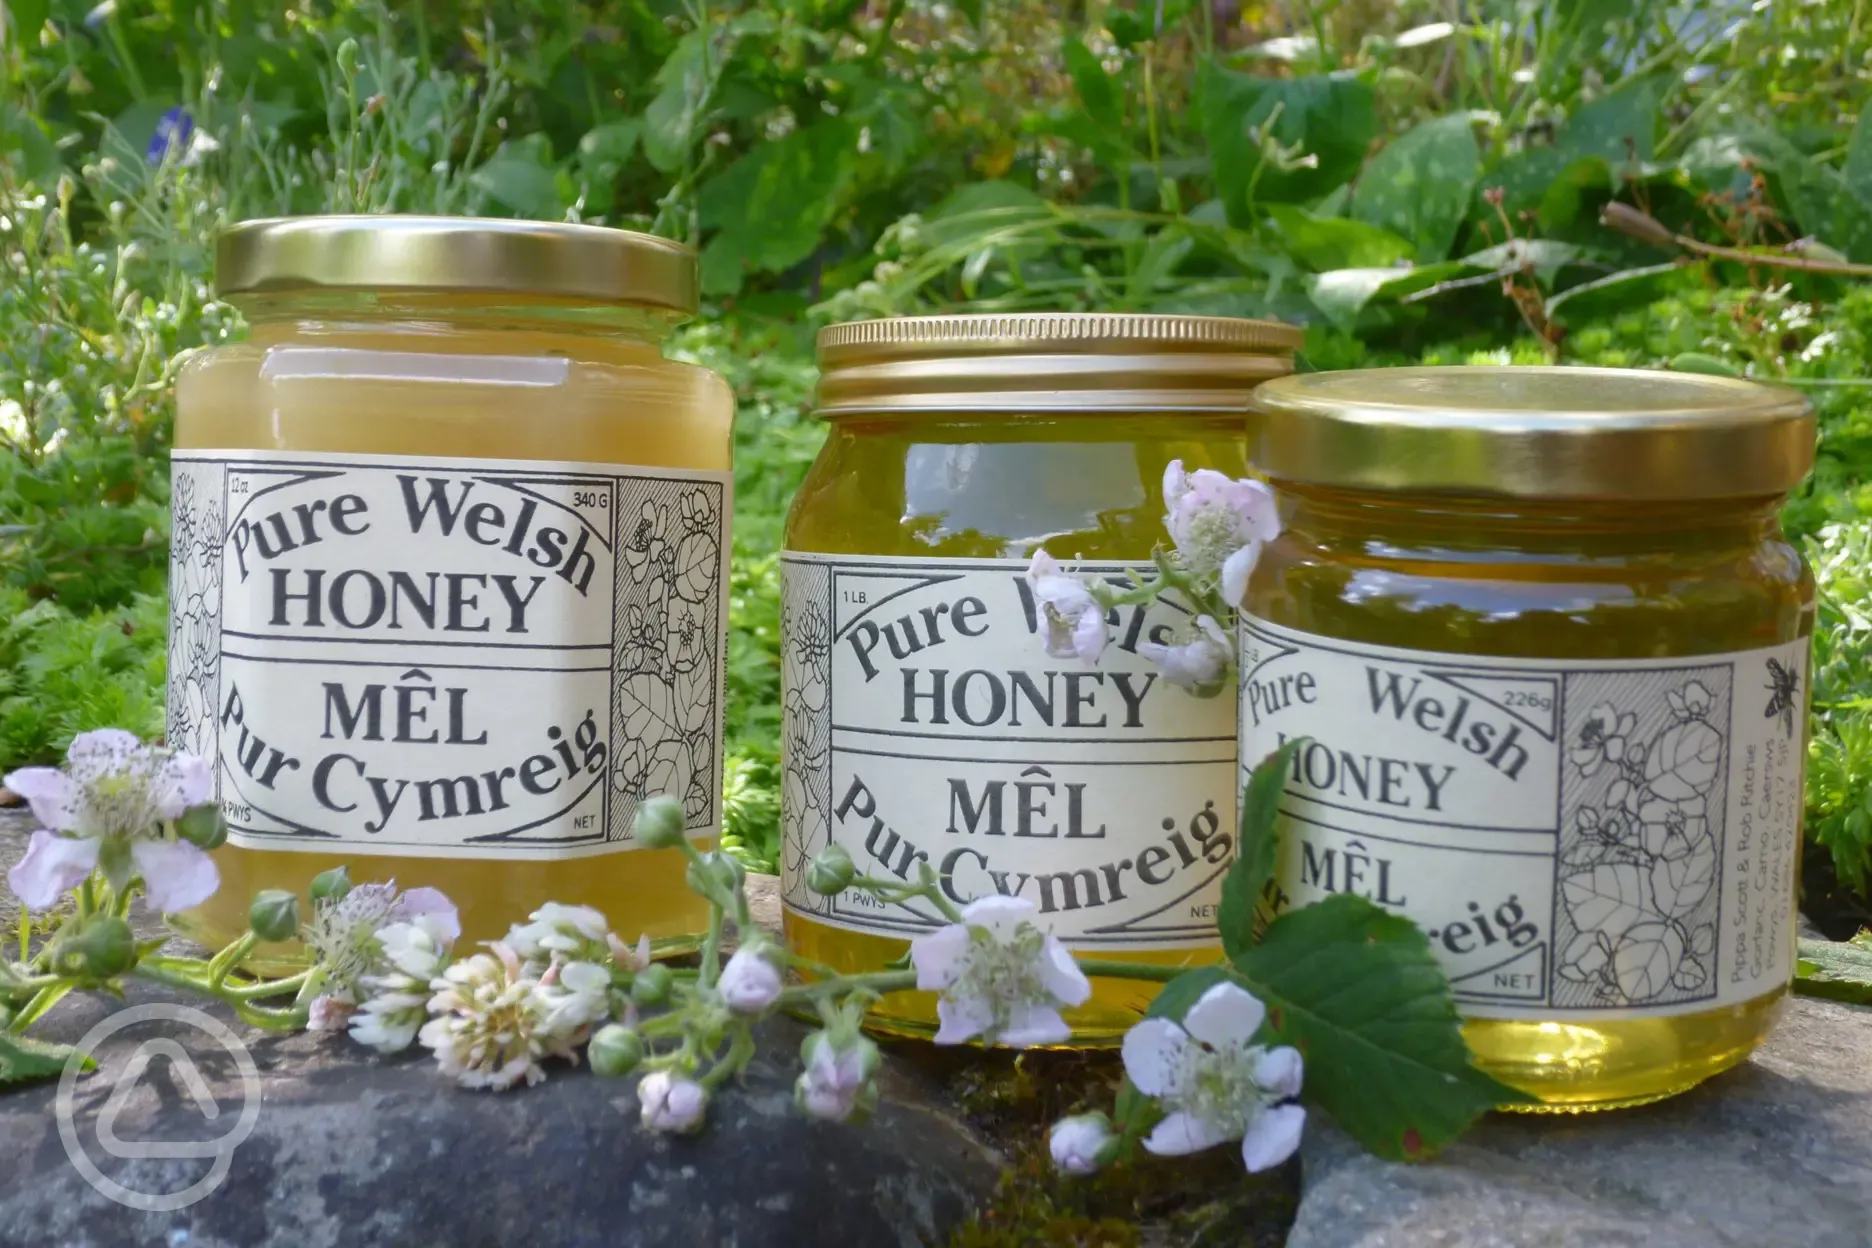 You can buy our unique and very local wonderful honey, gathered from the countryside around you.